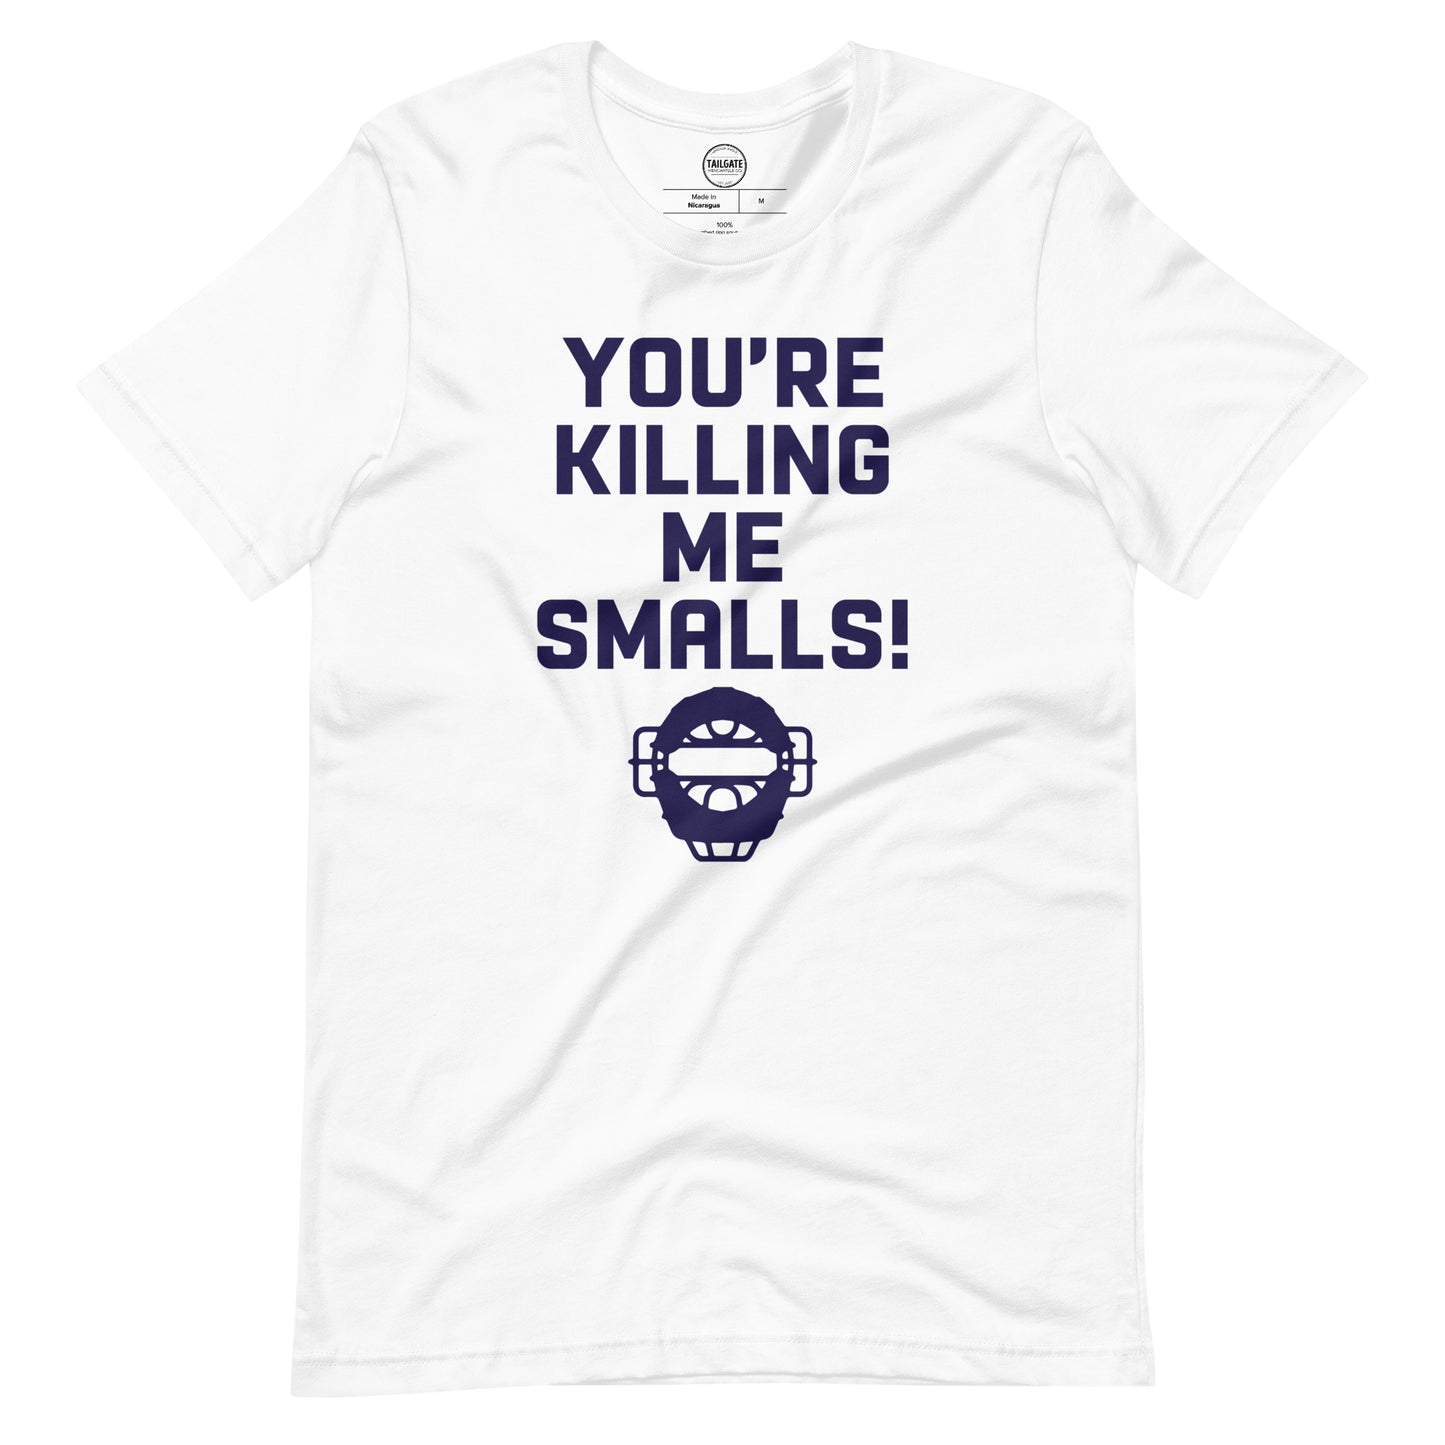 Image of a white t-shirt with design of "You're Killing Me Smalls!" in navy located on centre chest. FOR.EV.ER. is an homage to the great baseball movie "The Sandlot". This design is exclusive to Tailgate Mercantile and available only online.